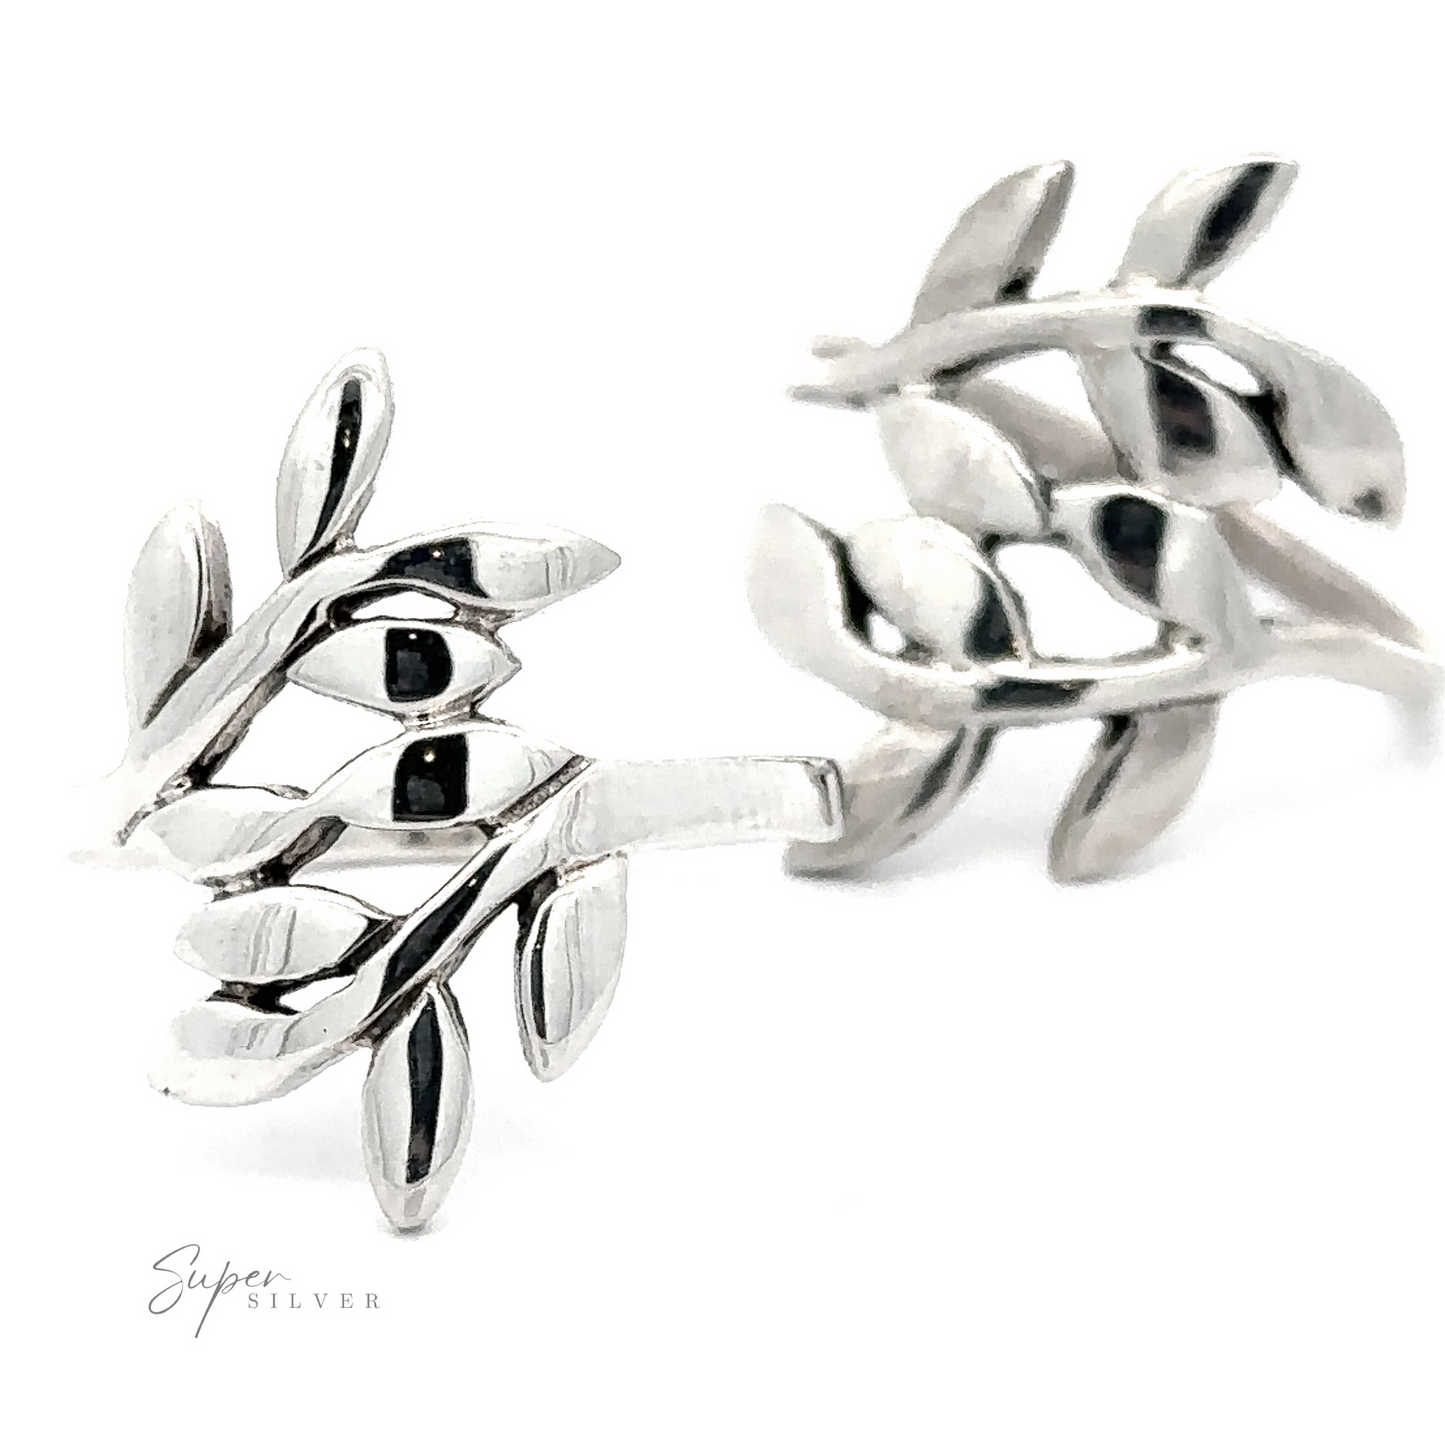 A pair of .925 sterling silver Olive Branch Ring earrings on a white background.